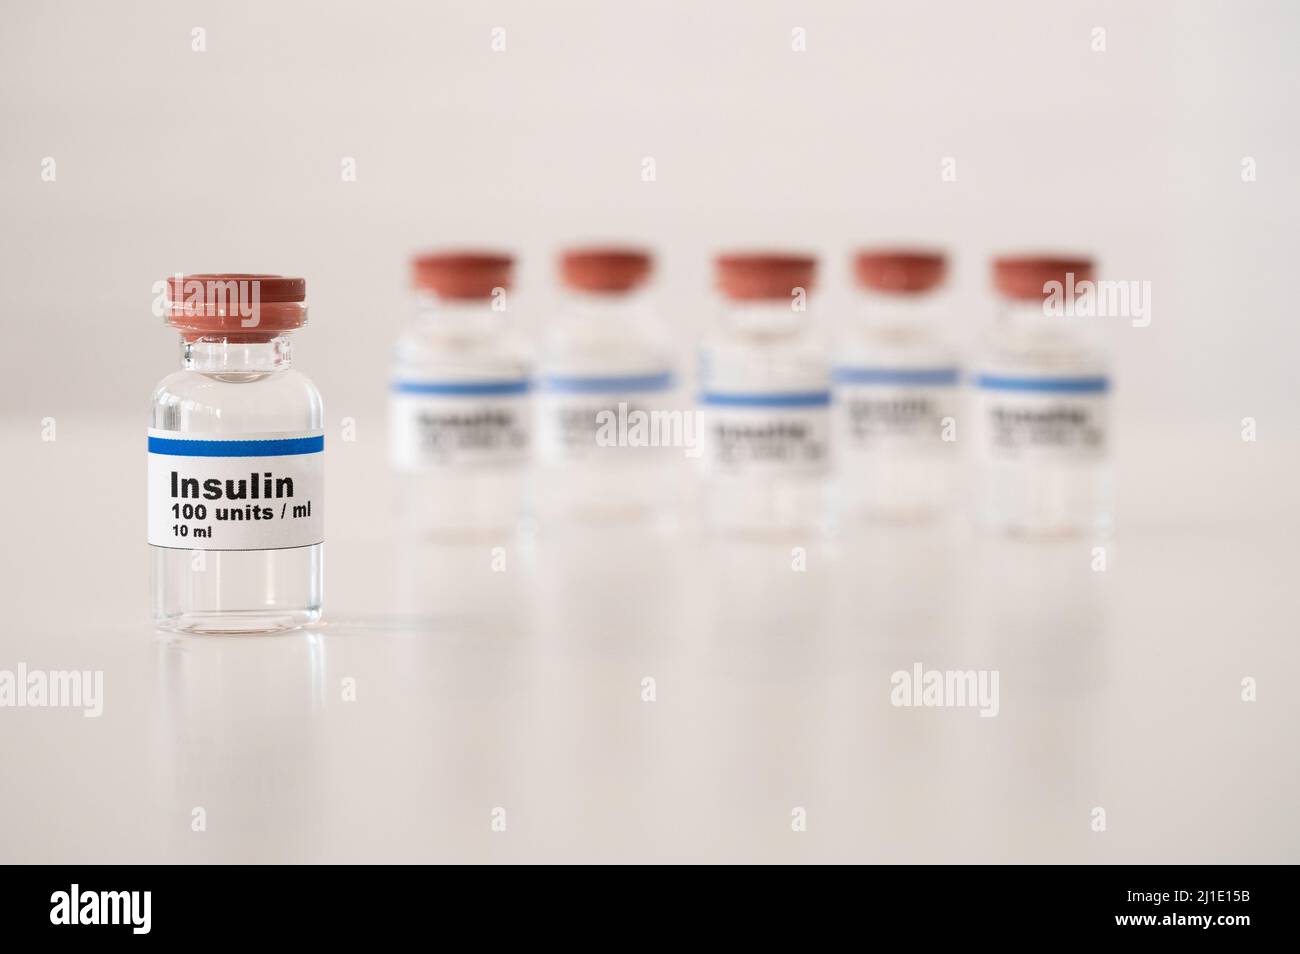 Insulin vials against a white background: properly cooling and storing insulin. Stock Photo